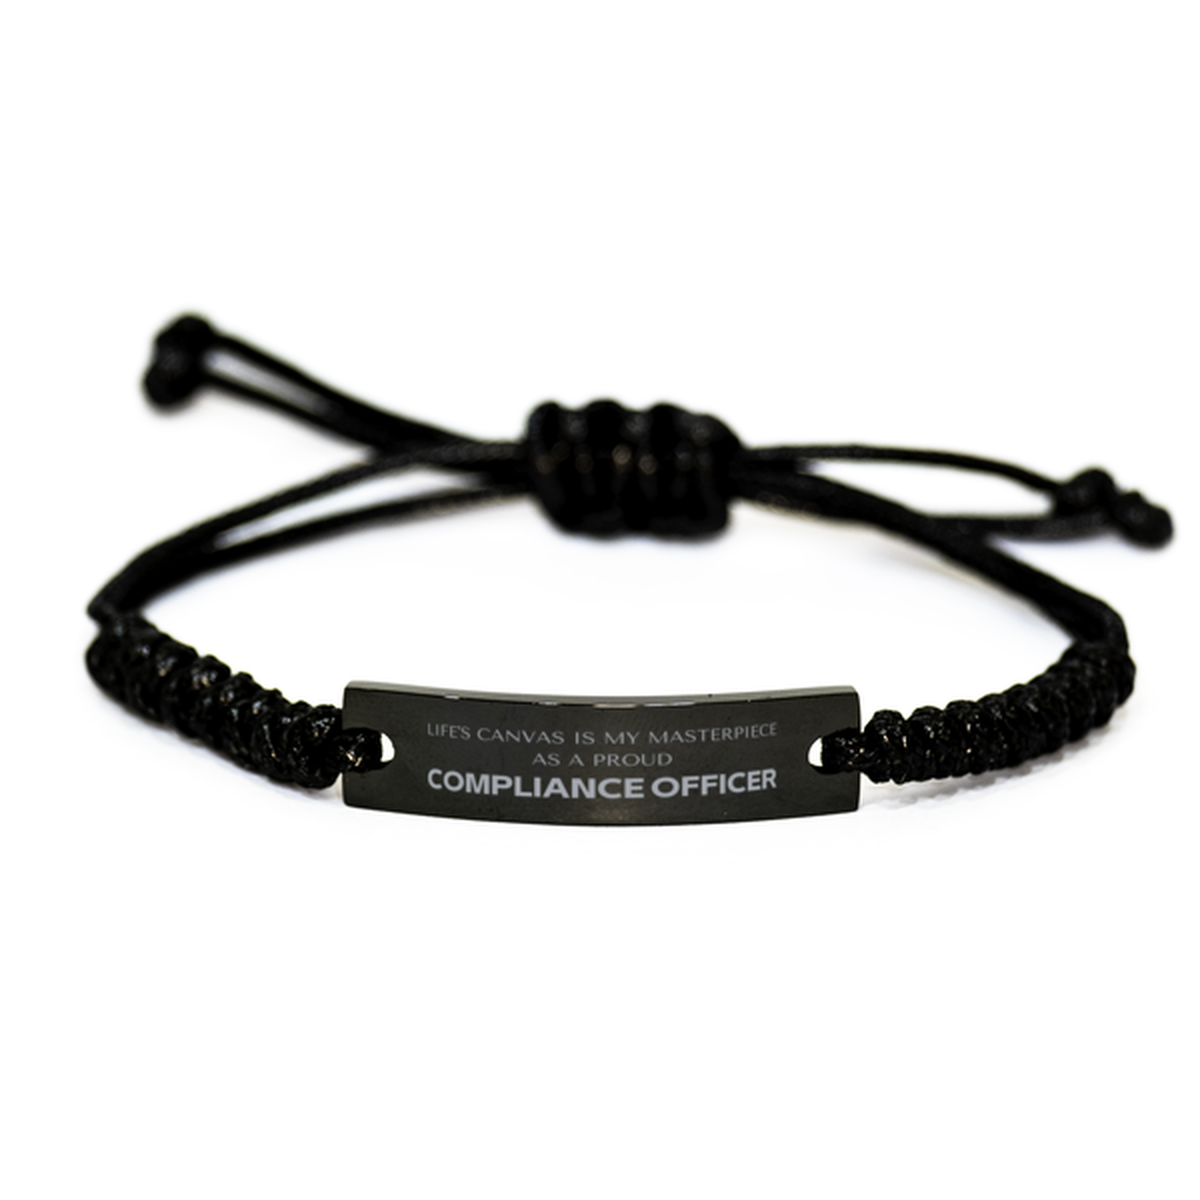 Proud Compliance Officer Gifts, Life's canvas is my masterpiece, Epic Birthday Christmas Unique Black Rope Bracelet For Compliance Officer, Coworkers, Men, Women, Friends